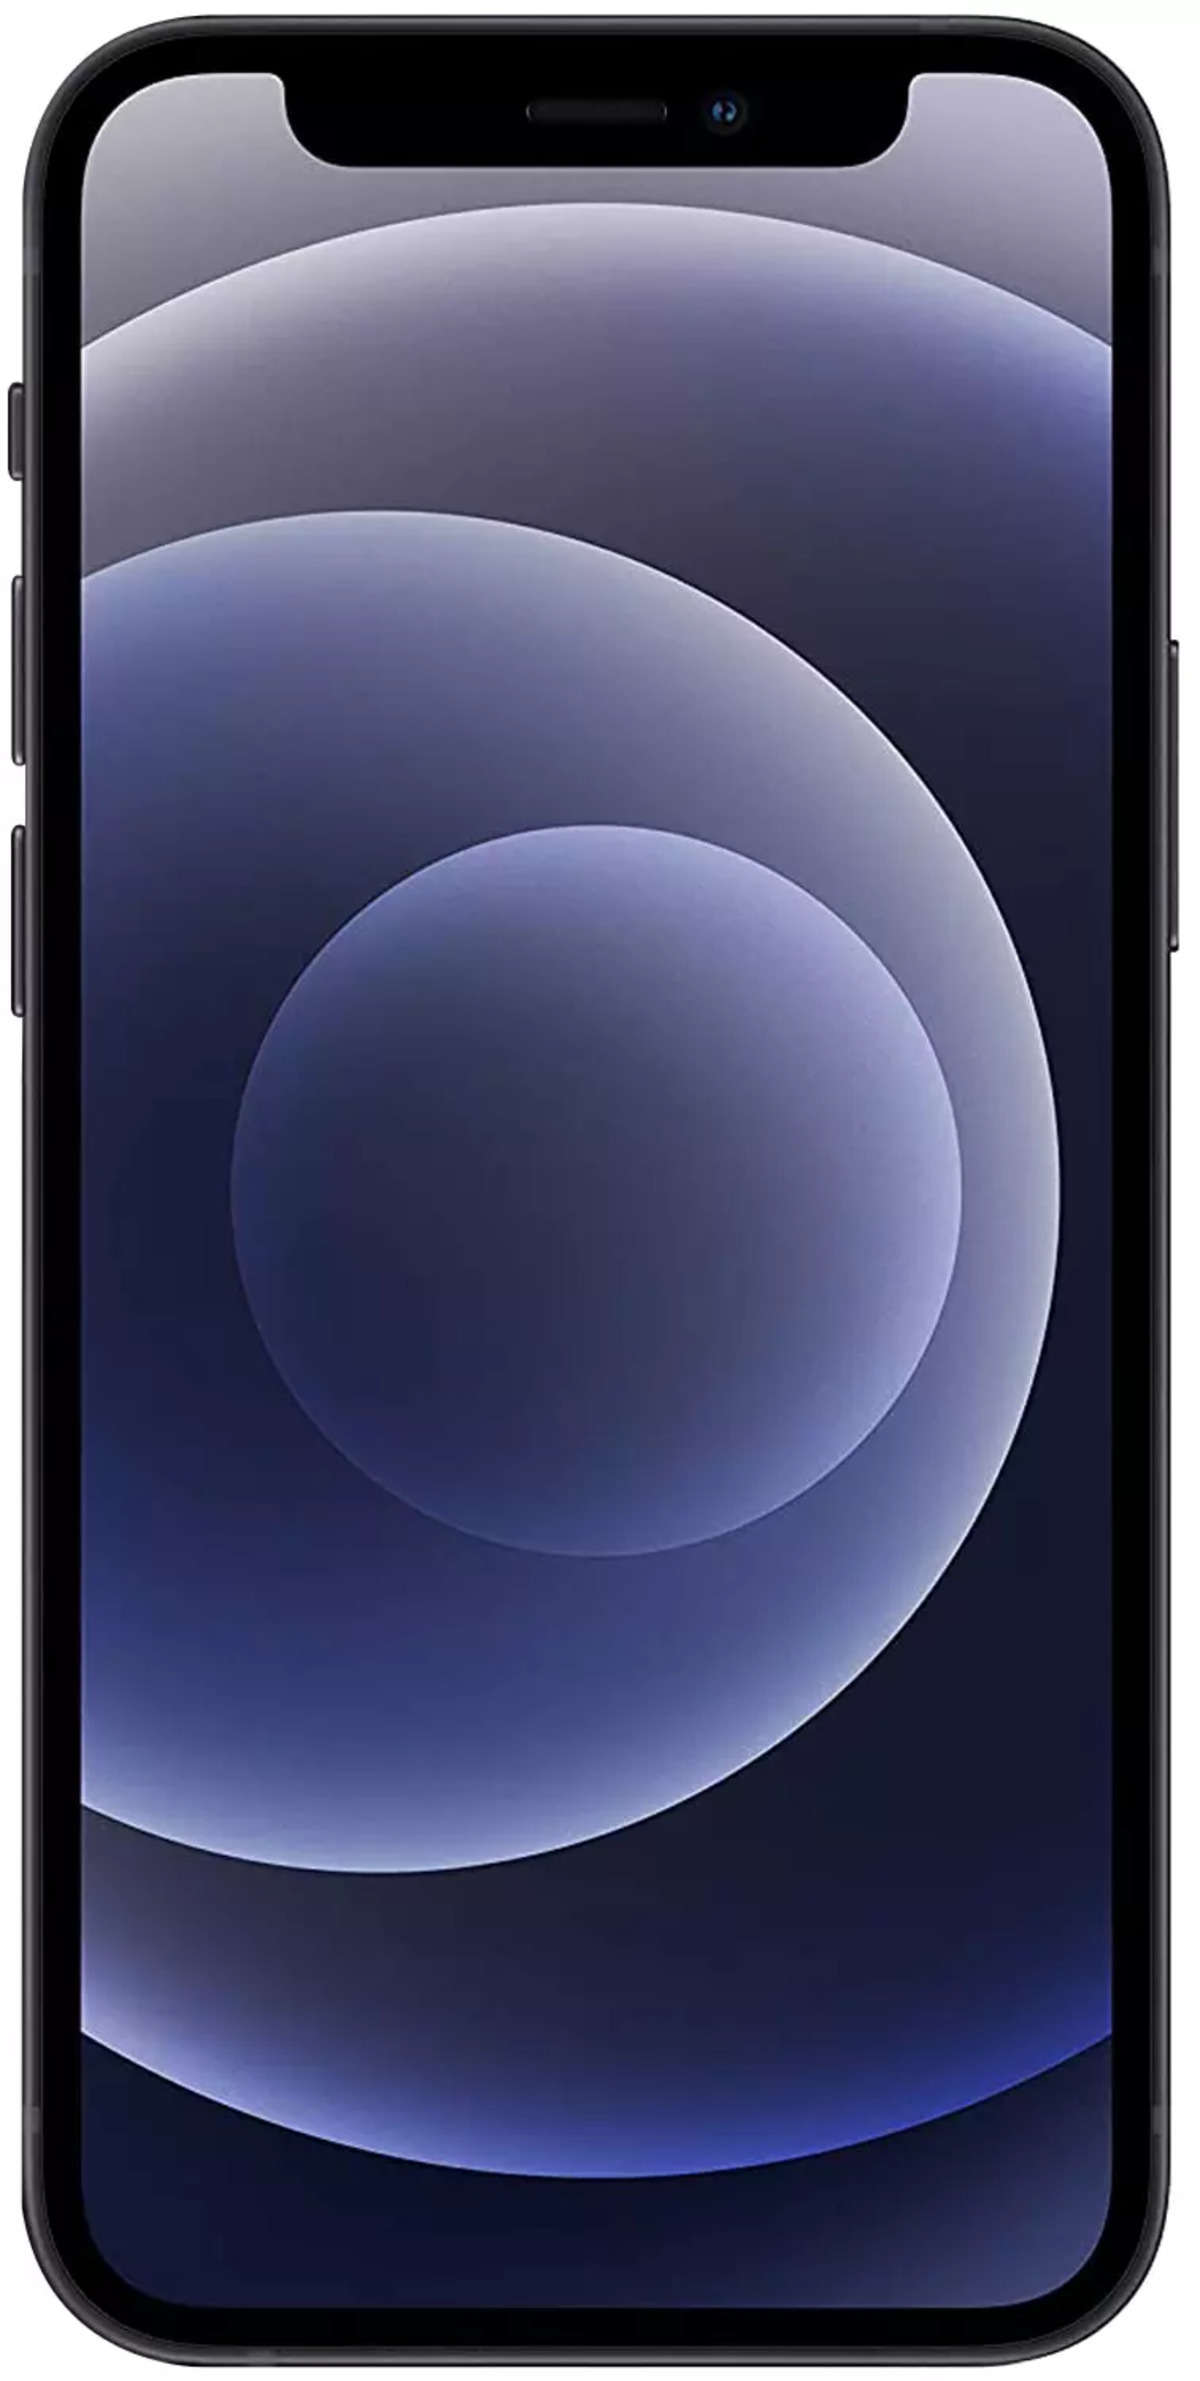 Apple Iphone 12 Mini Price In India Full Specifications 25th Dec 22 At Gadgets Now